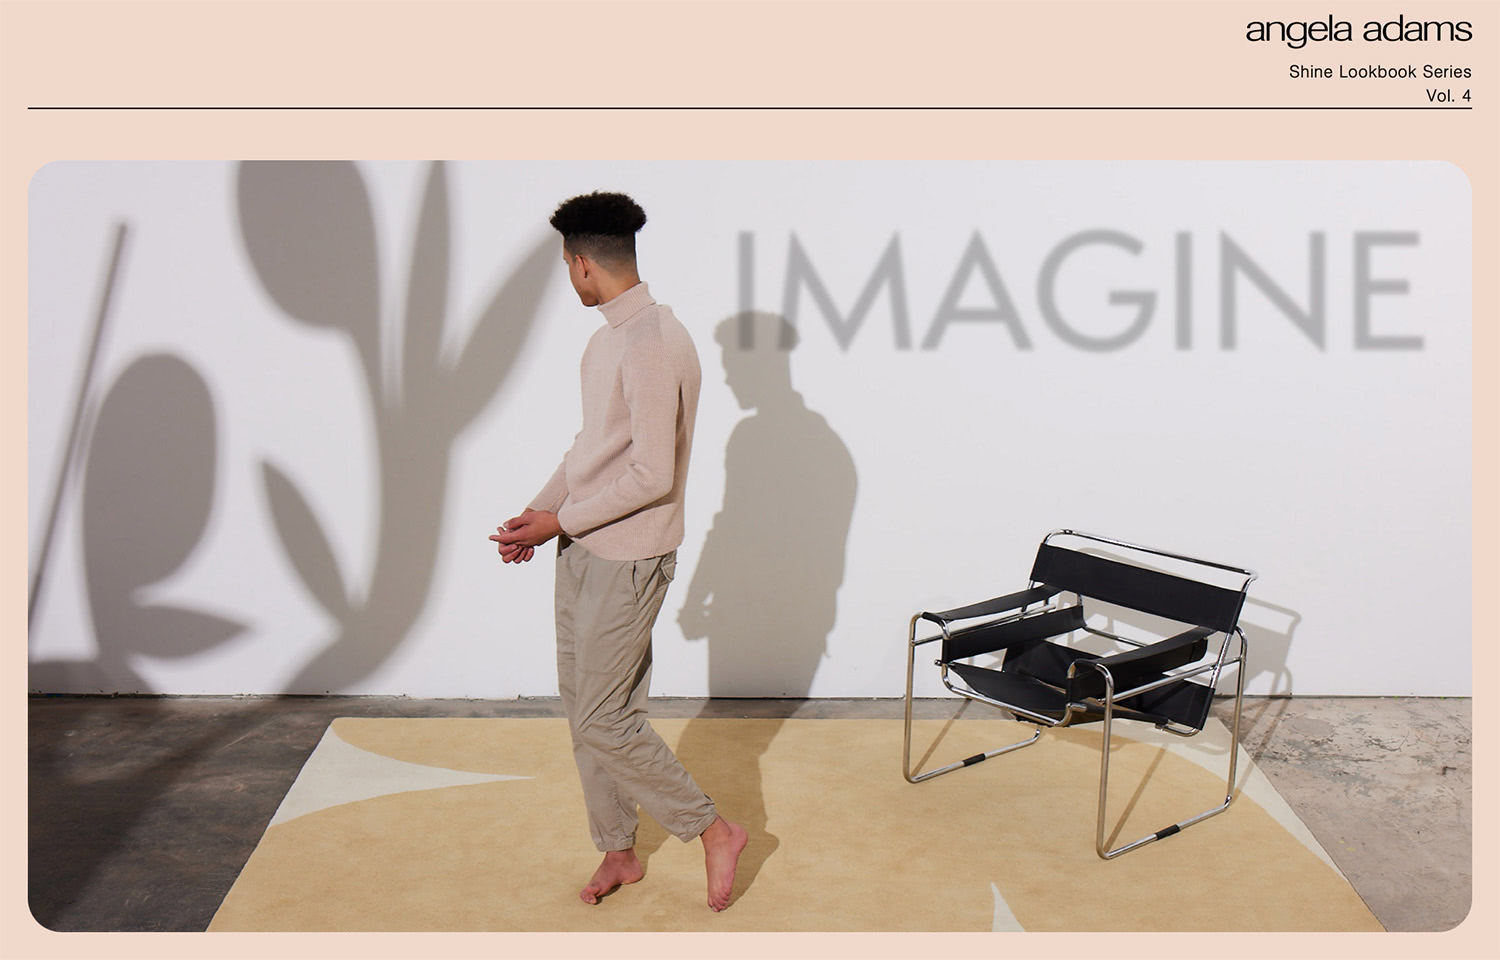 a man walks on a plush, modern, area rug in beige and cream tones